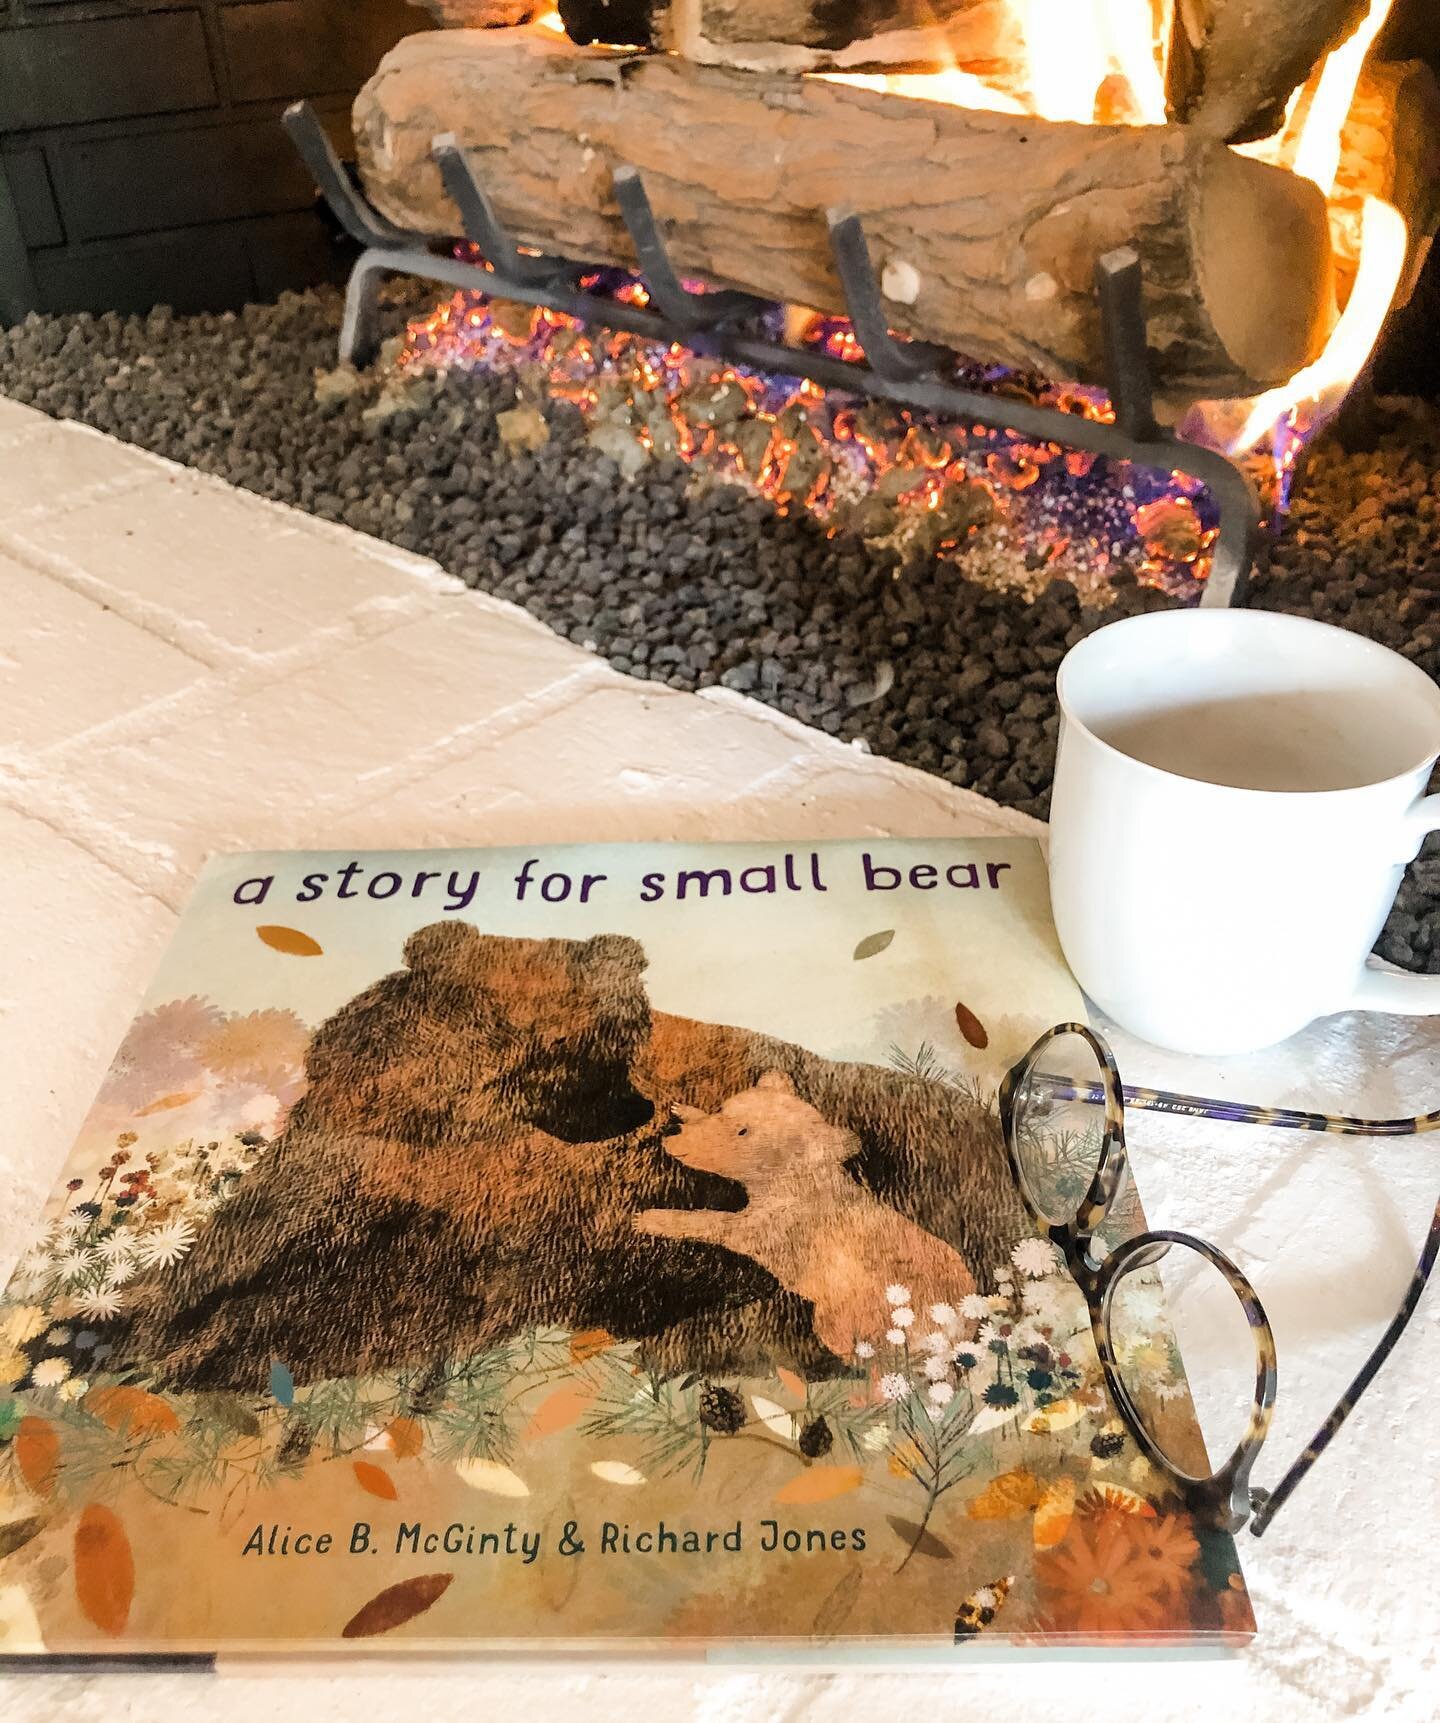 We are always looking for sweet bear stories in our family as we affectionately call our youngest &ldquo;Bear&rdquo; which rhymes with her first name. So, we were delighted to learn about A Story For Small Bear by Alice B. McGinty and illustrated by 